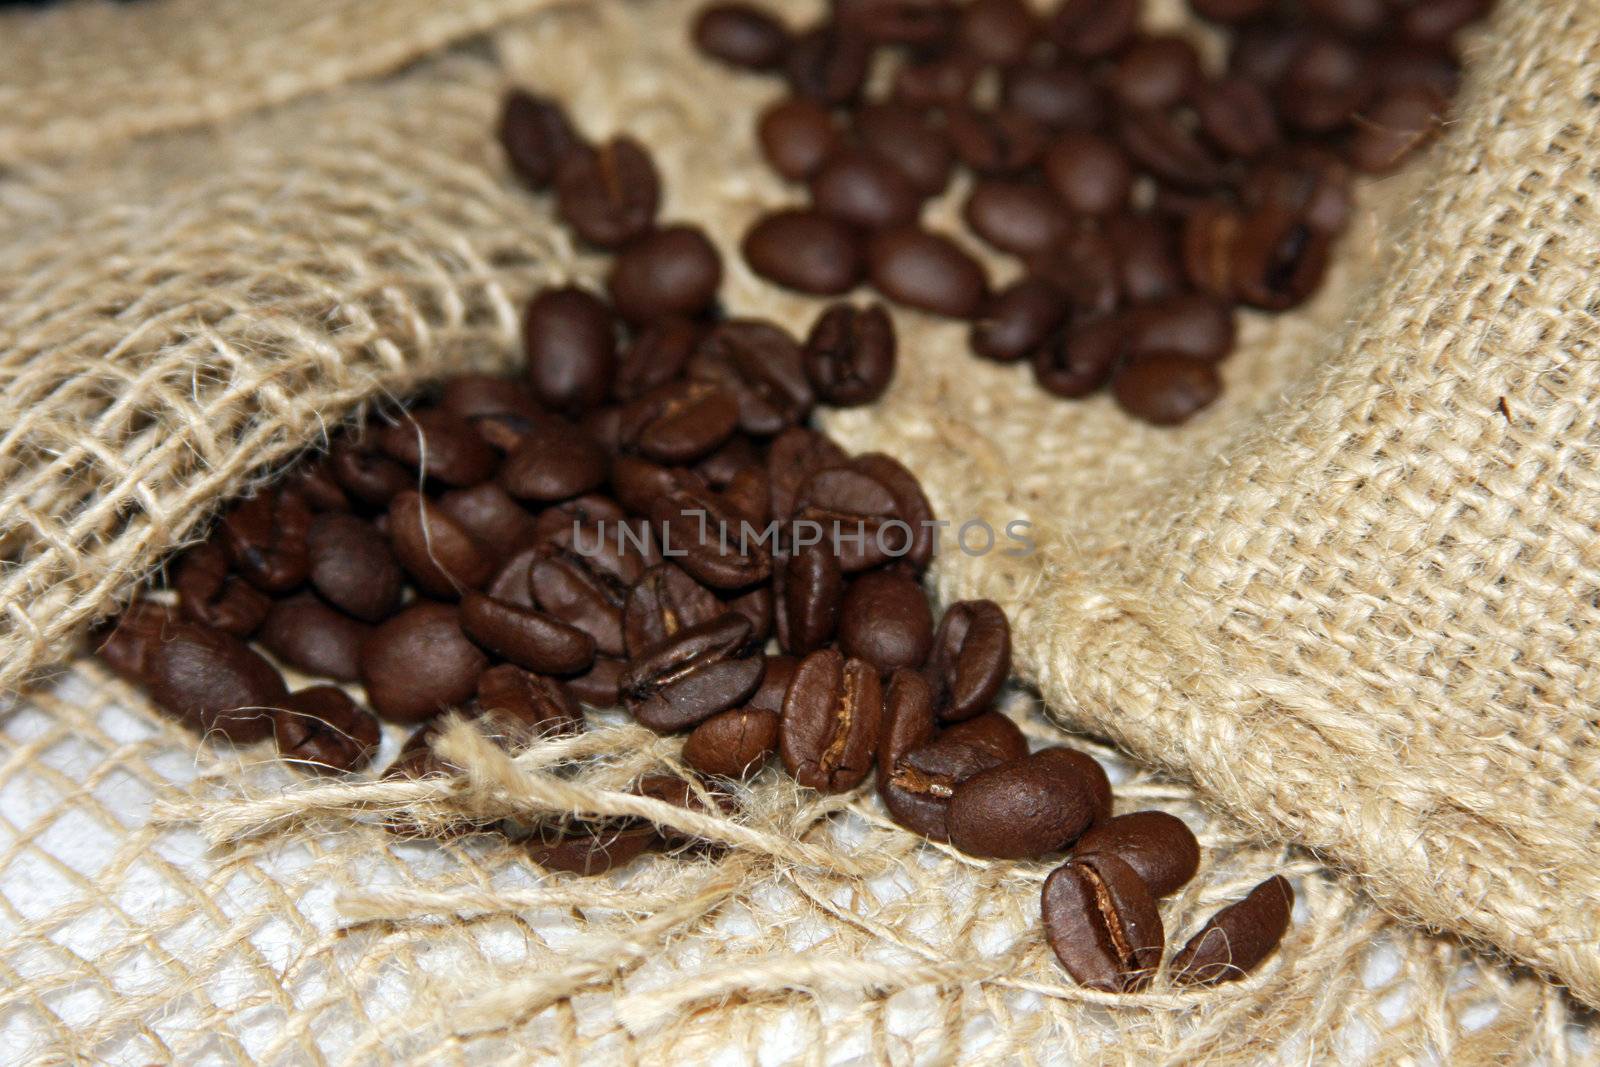 Burlap sack with coffee beans by LuBueno